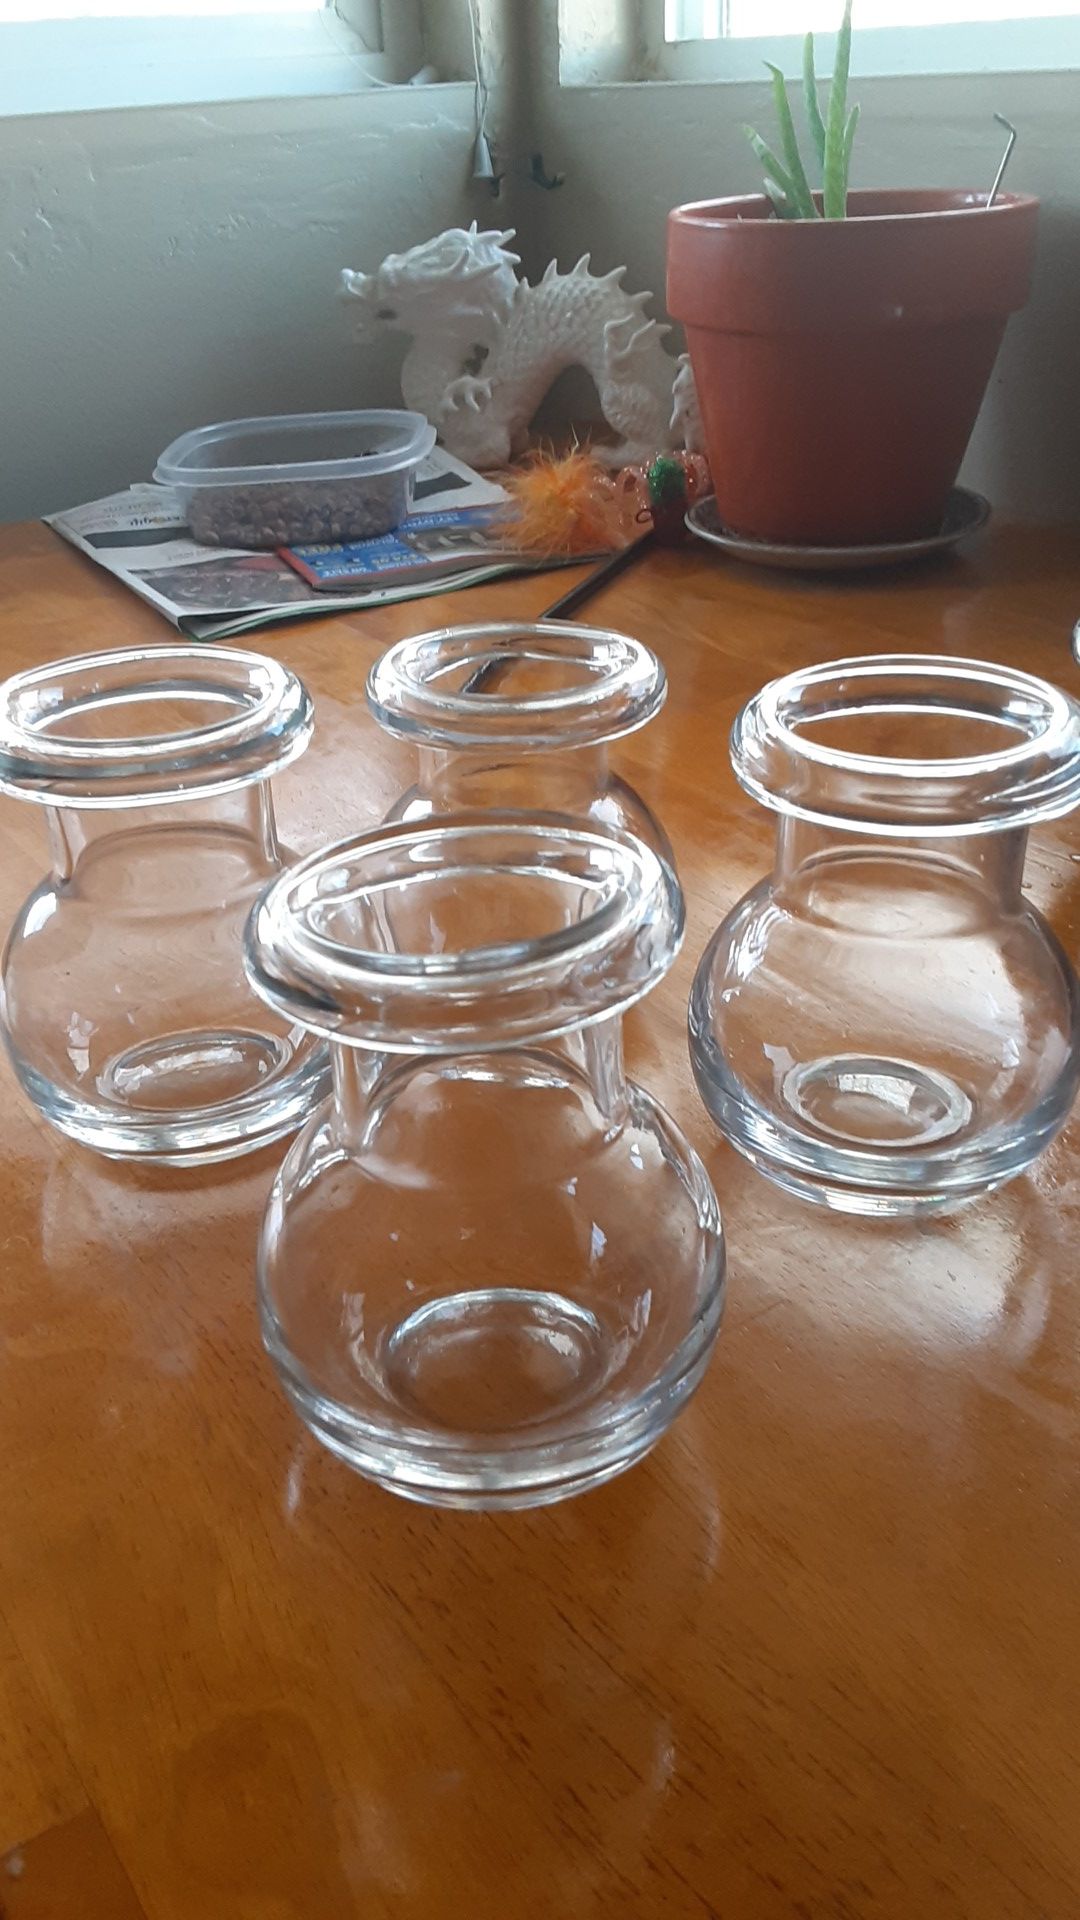 Therapeutic suction glass cups hand blown got him from my grandpa don't know how old they are they seem pretty old but they're in perfect condition